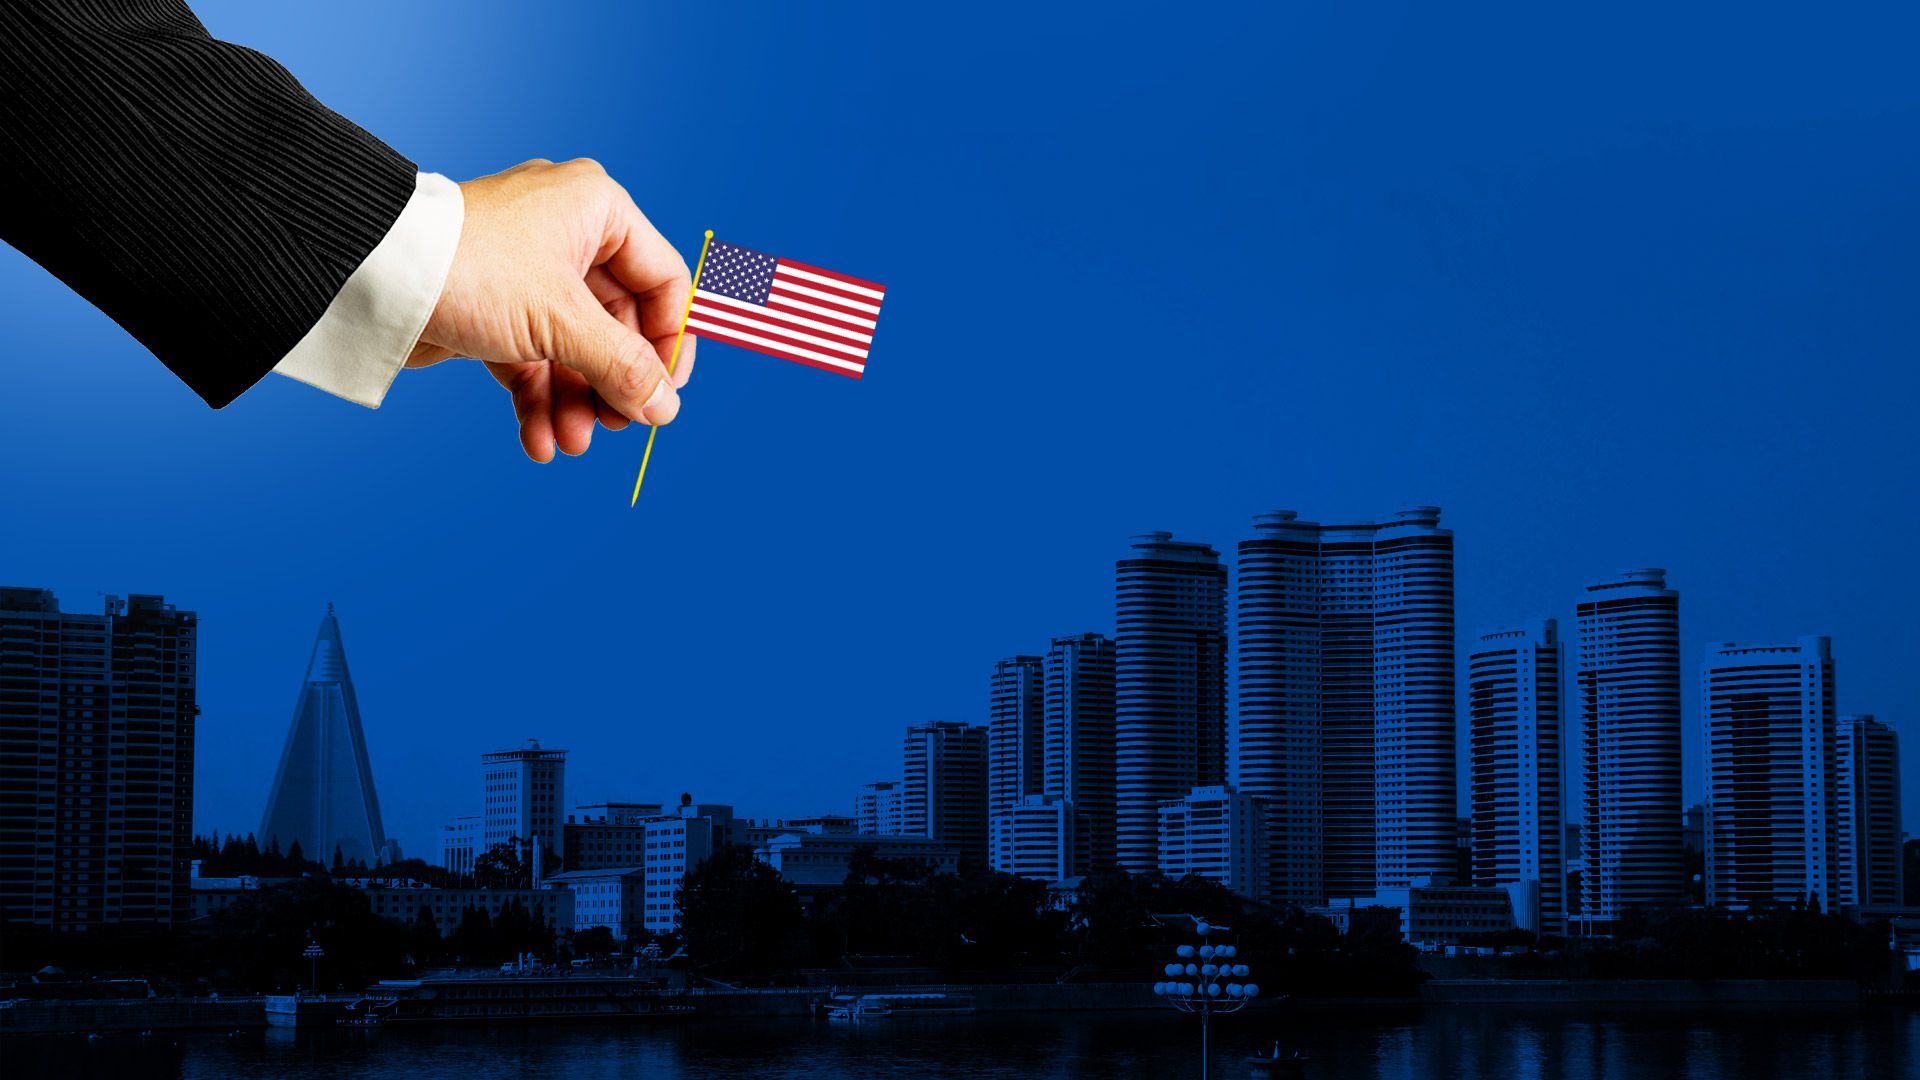 A hand places an American flag on a cityscape.